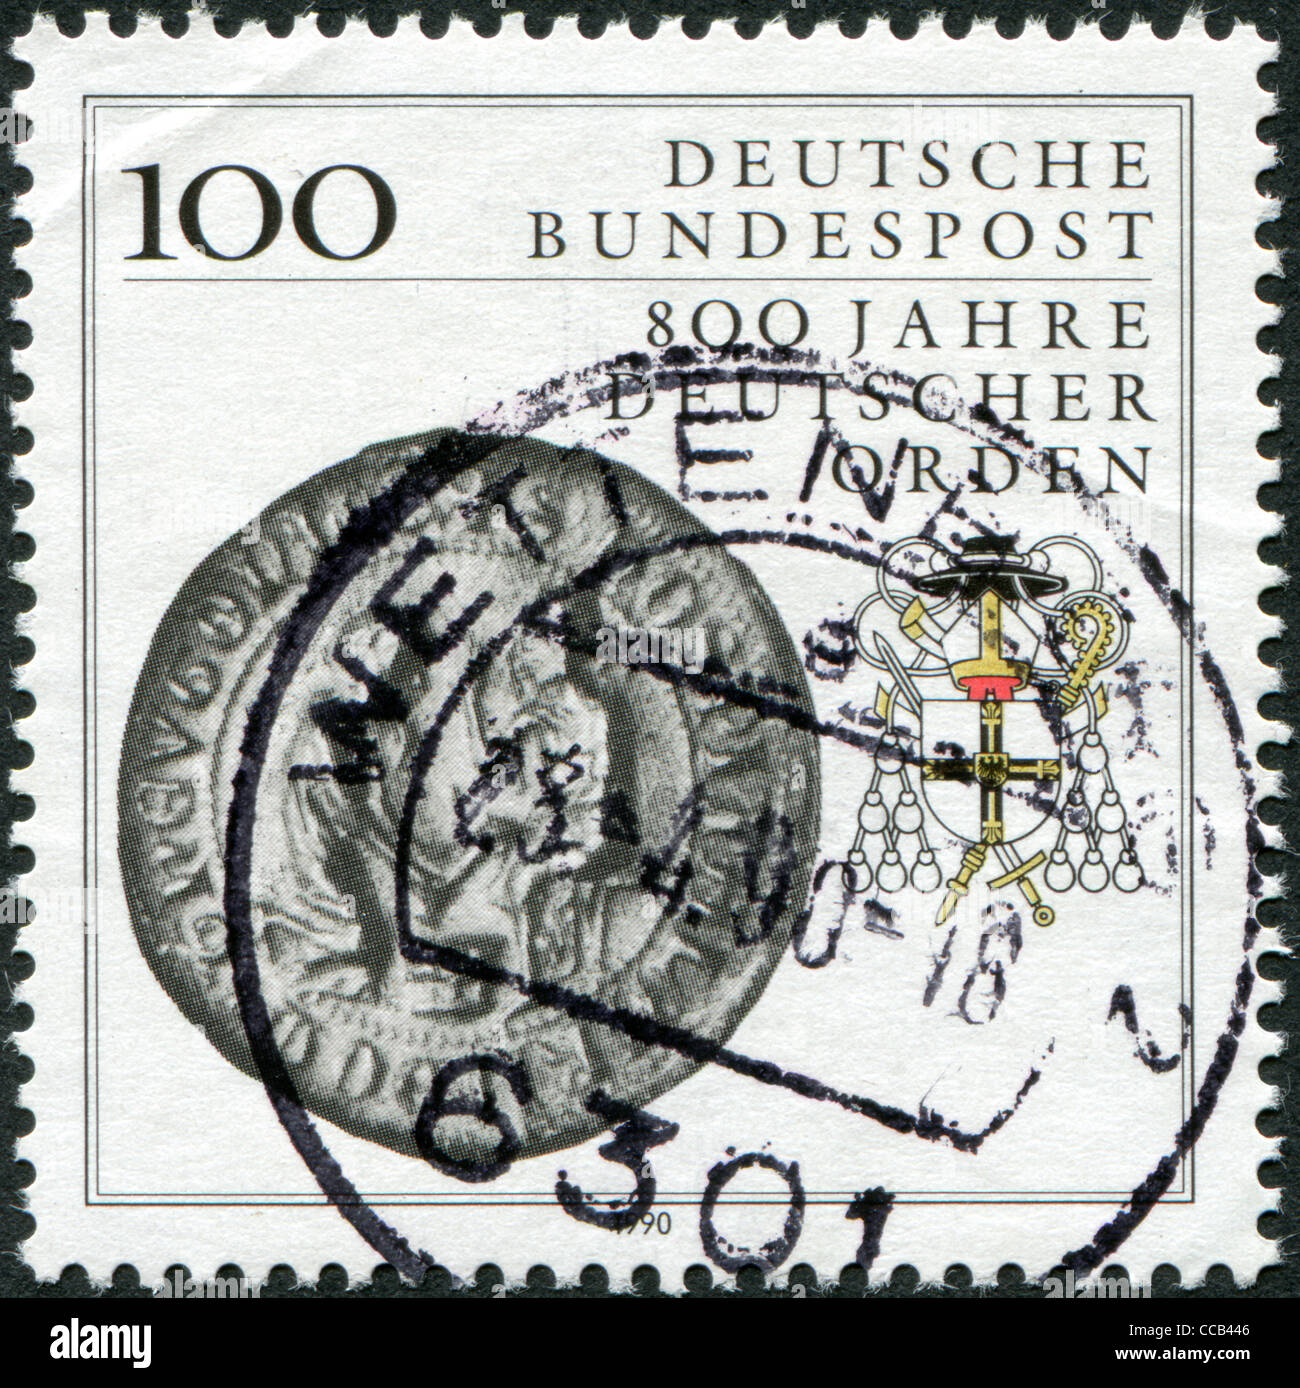 GERMANY - CIRCA 1990: A stamp printed in Germany, shows a seal (1400) and the heraldic emblem of the Teutonic Order, circa 1990 Stock Photo